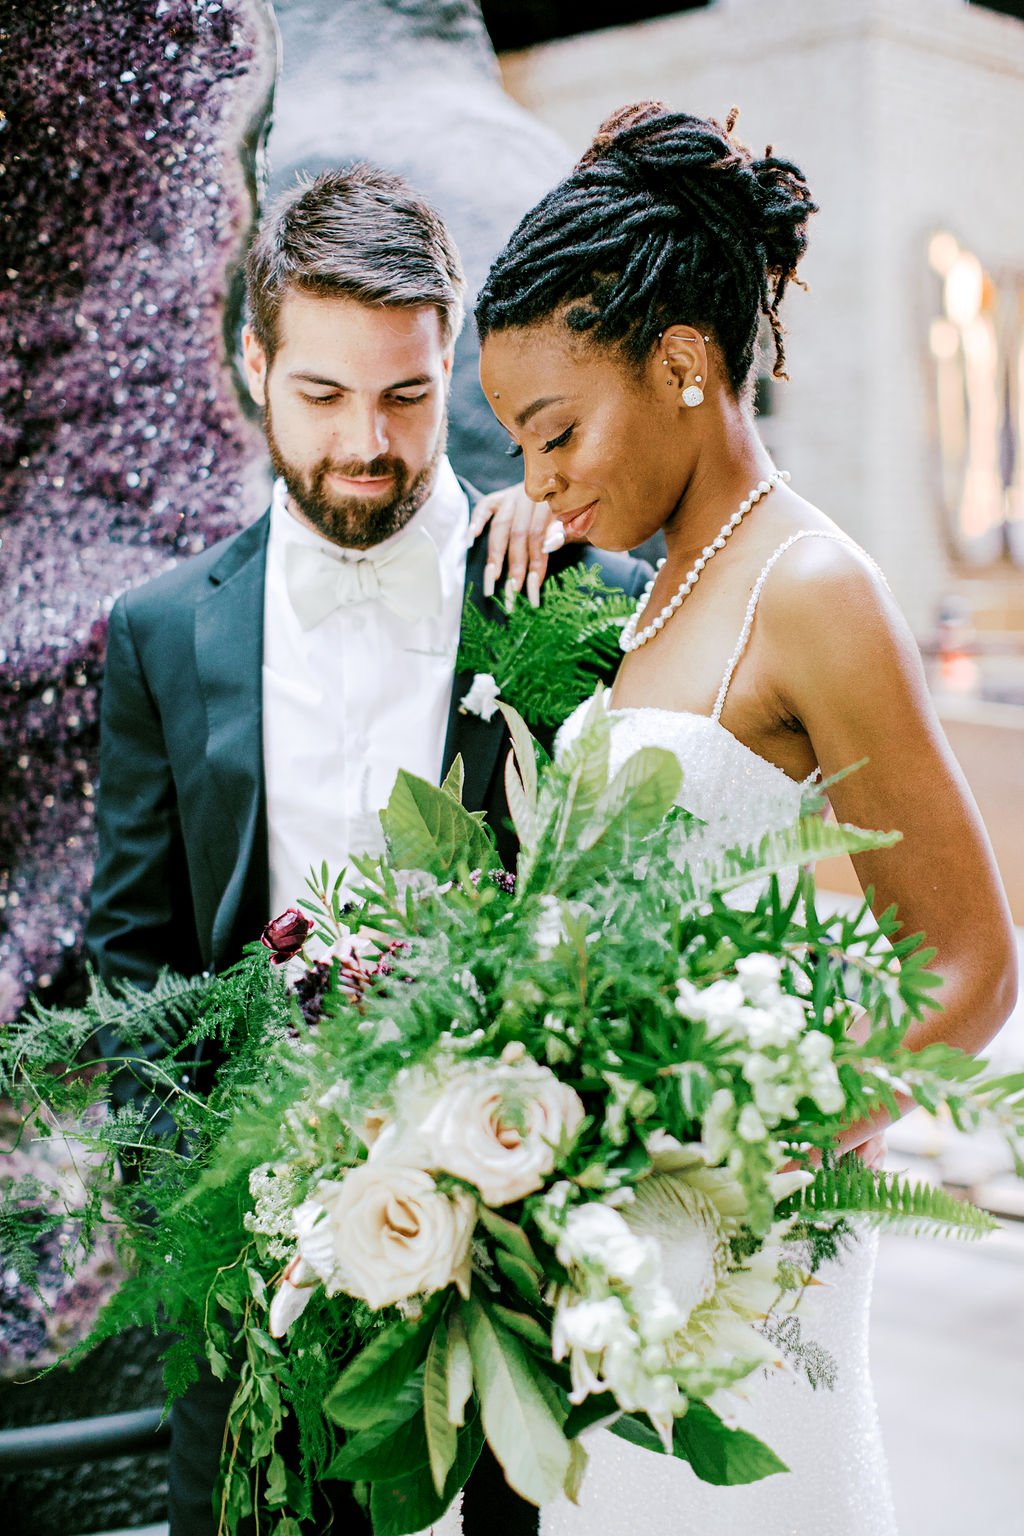 5-things-to-know-before-booking-your-wedding-florist-brought-to-you-by-savannah-wedding-planner-and-savannah-florist-ivory-and-beau-savannah-plant-riverside-district-savannah-wedding-savannah-bridal-shop-maggie-sottero-made-wiith-love-bridal-42.jpg